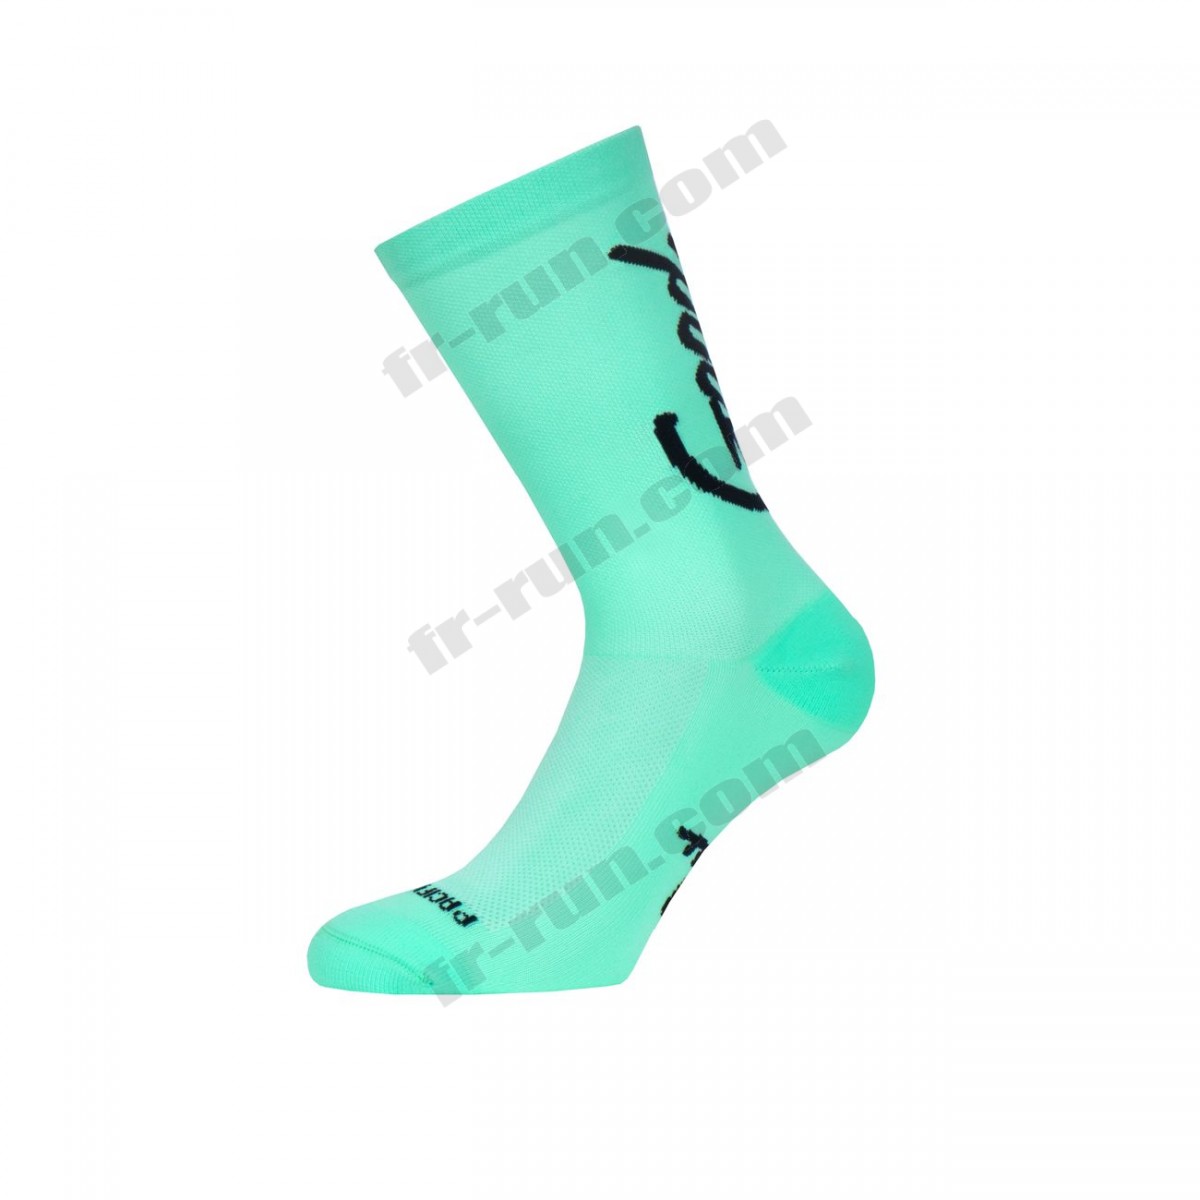 Pacific And Co/running adulte PACIFIC and CO GOOD VIBES Unisex Casual Socks ◇◇◇ Pas Cher Du Tout - Pacific And Co/running adulte PACIFIC and CO GOOD VIBES Unisex Casual Socks ◇◇◇ Pas Cher Du Tout